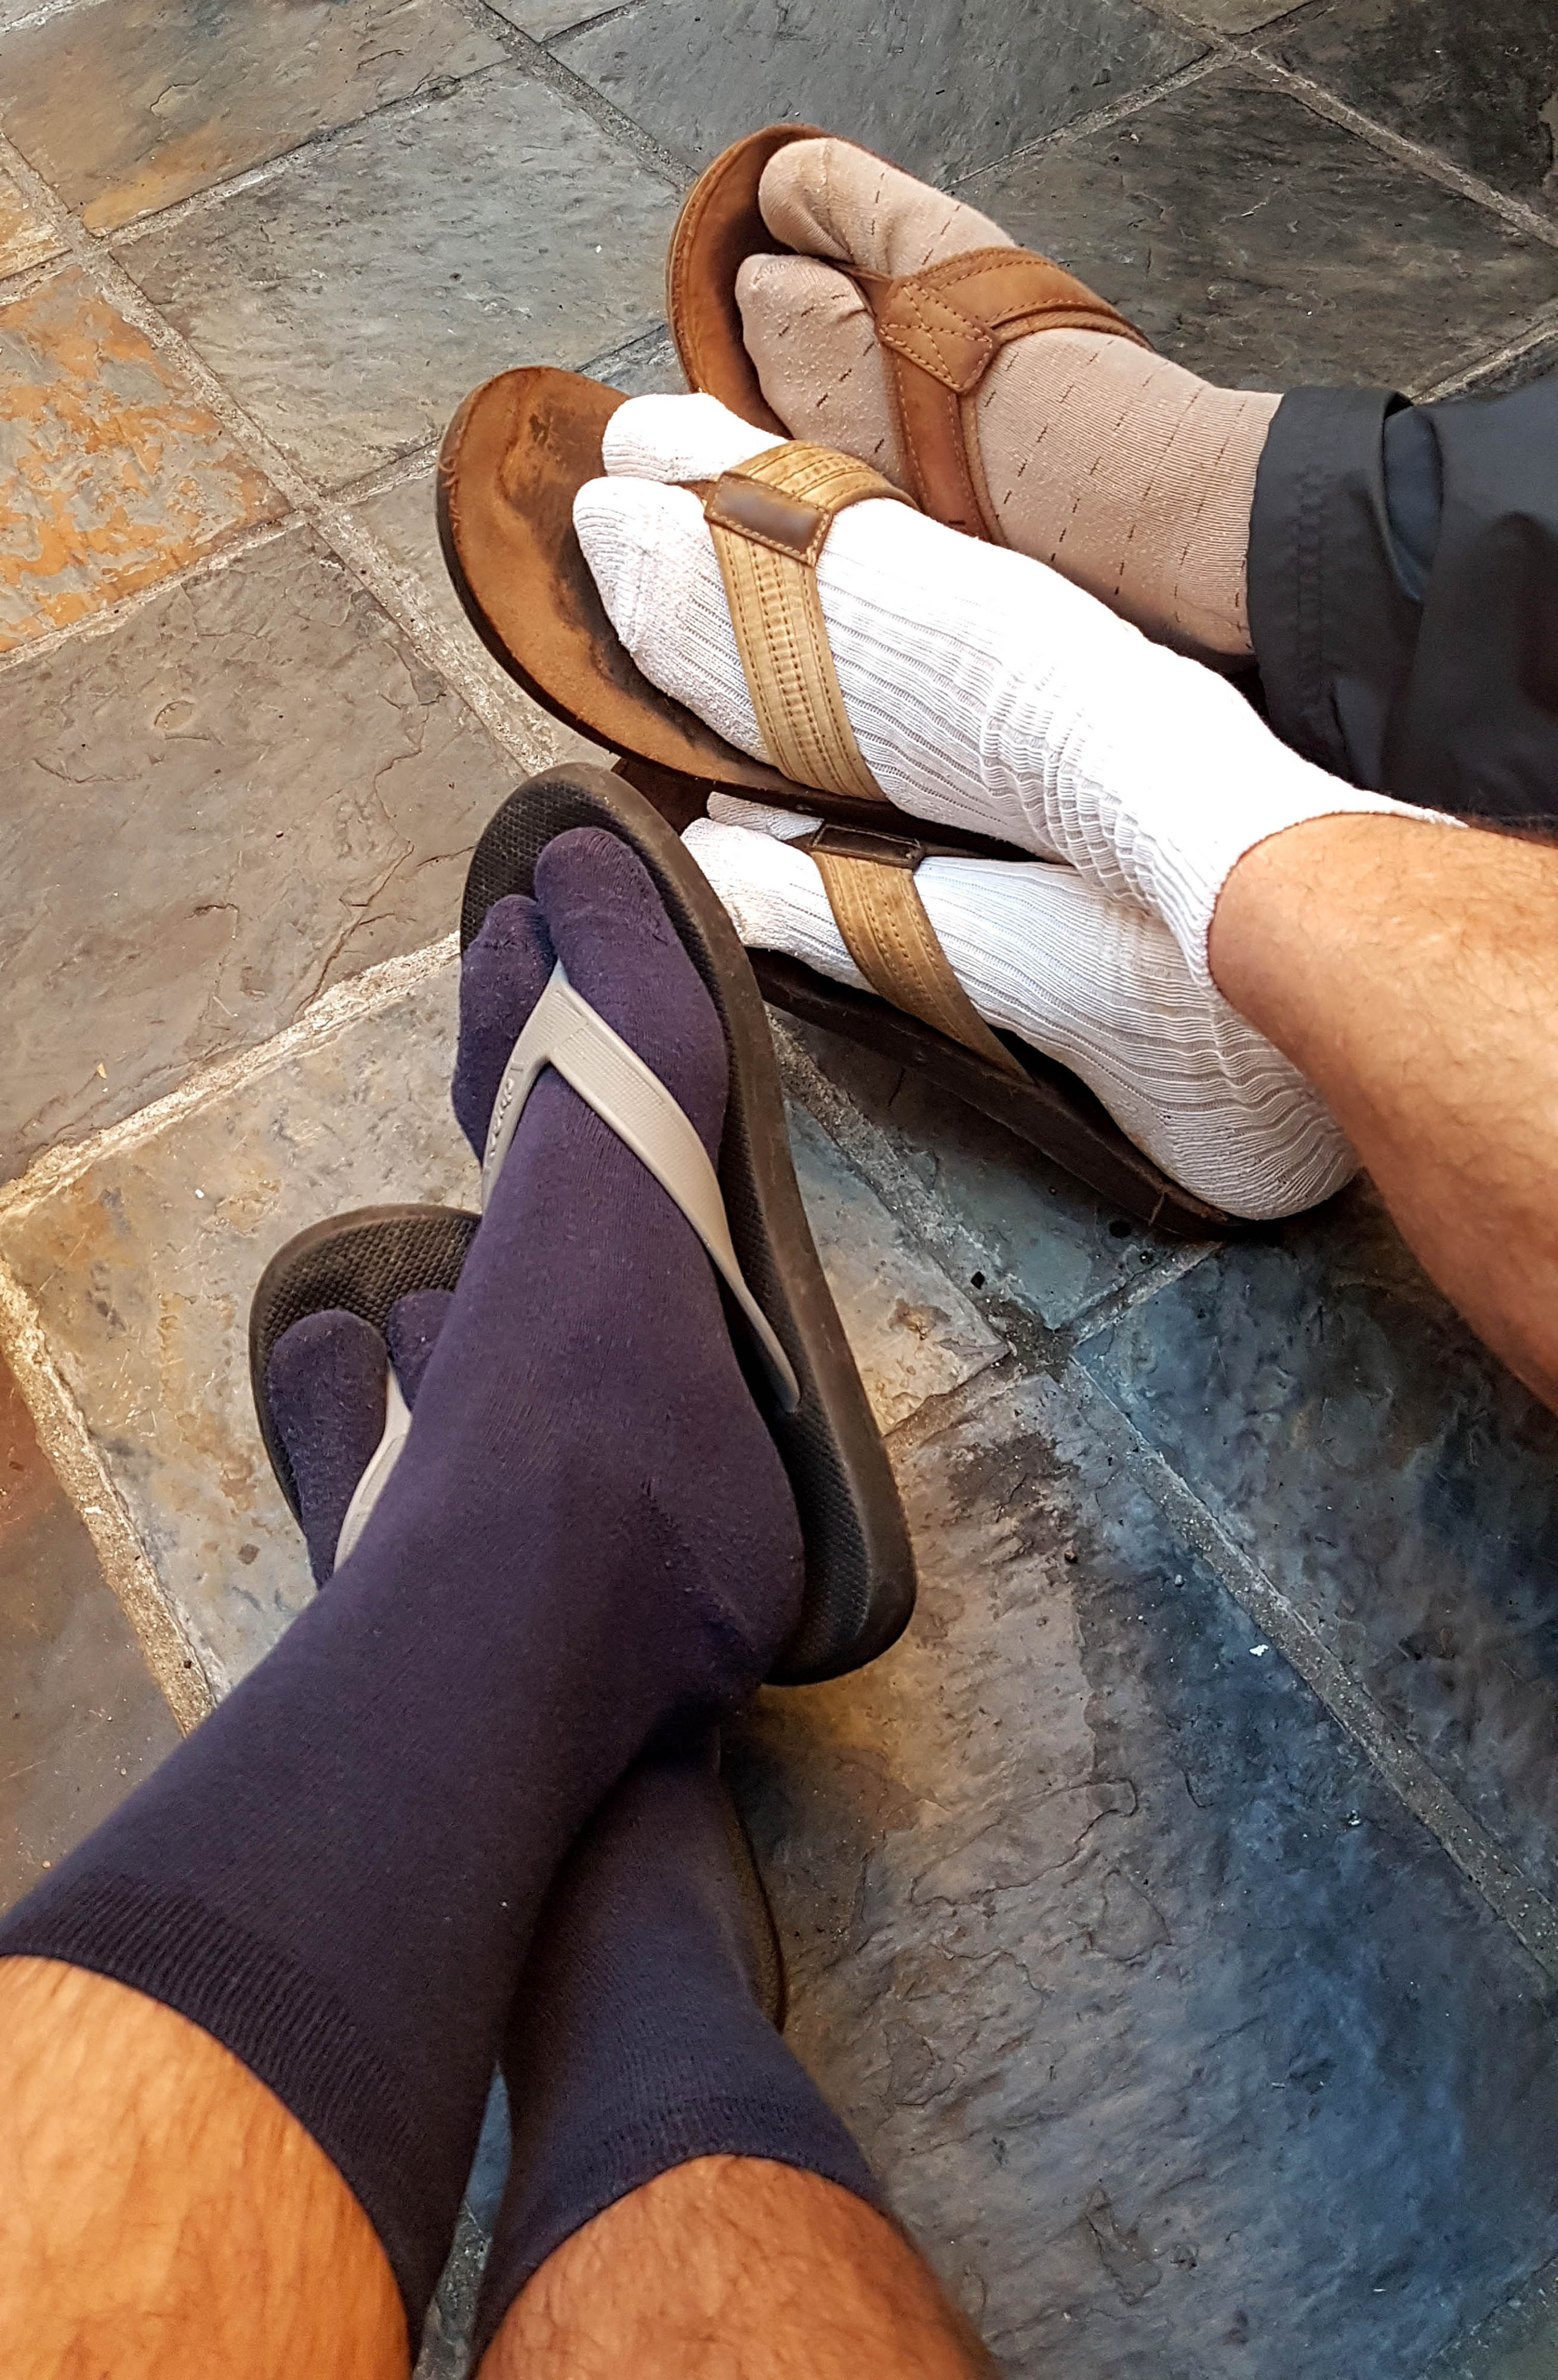 Three pairs of feet wearing socks and sandals